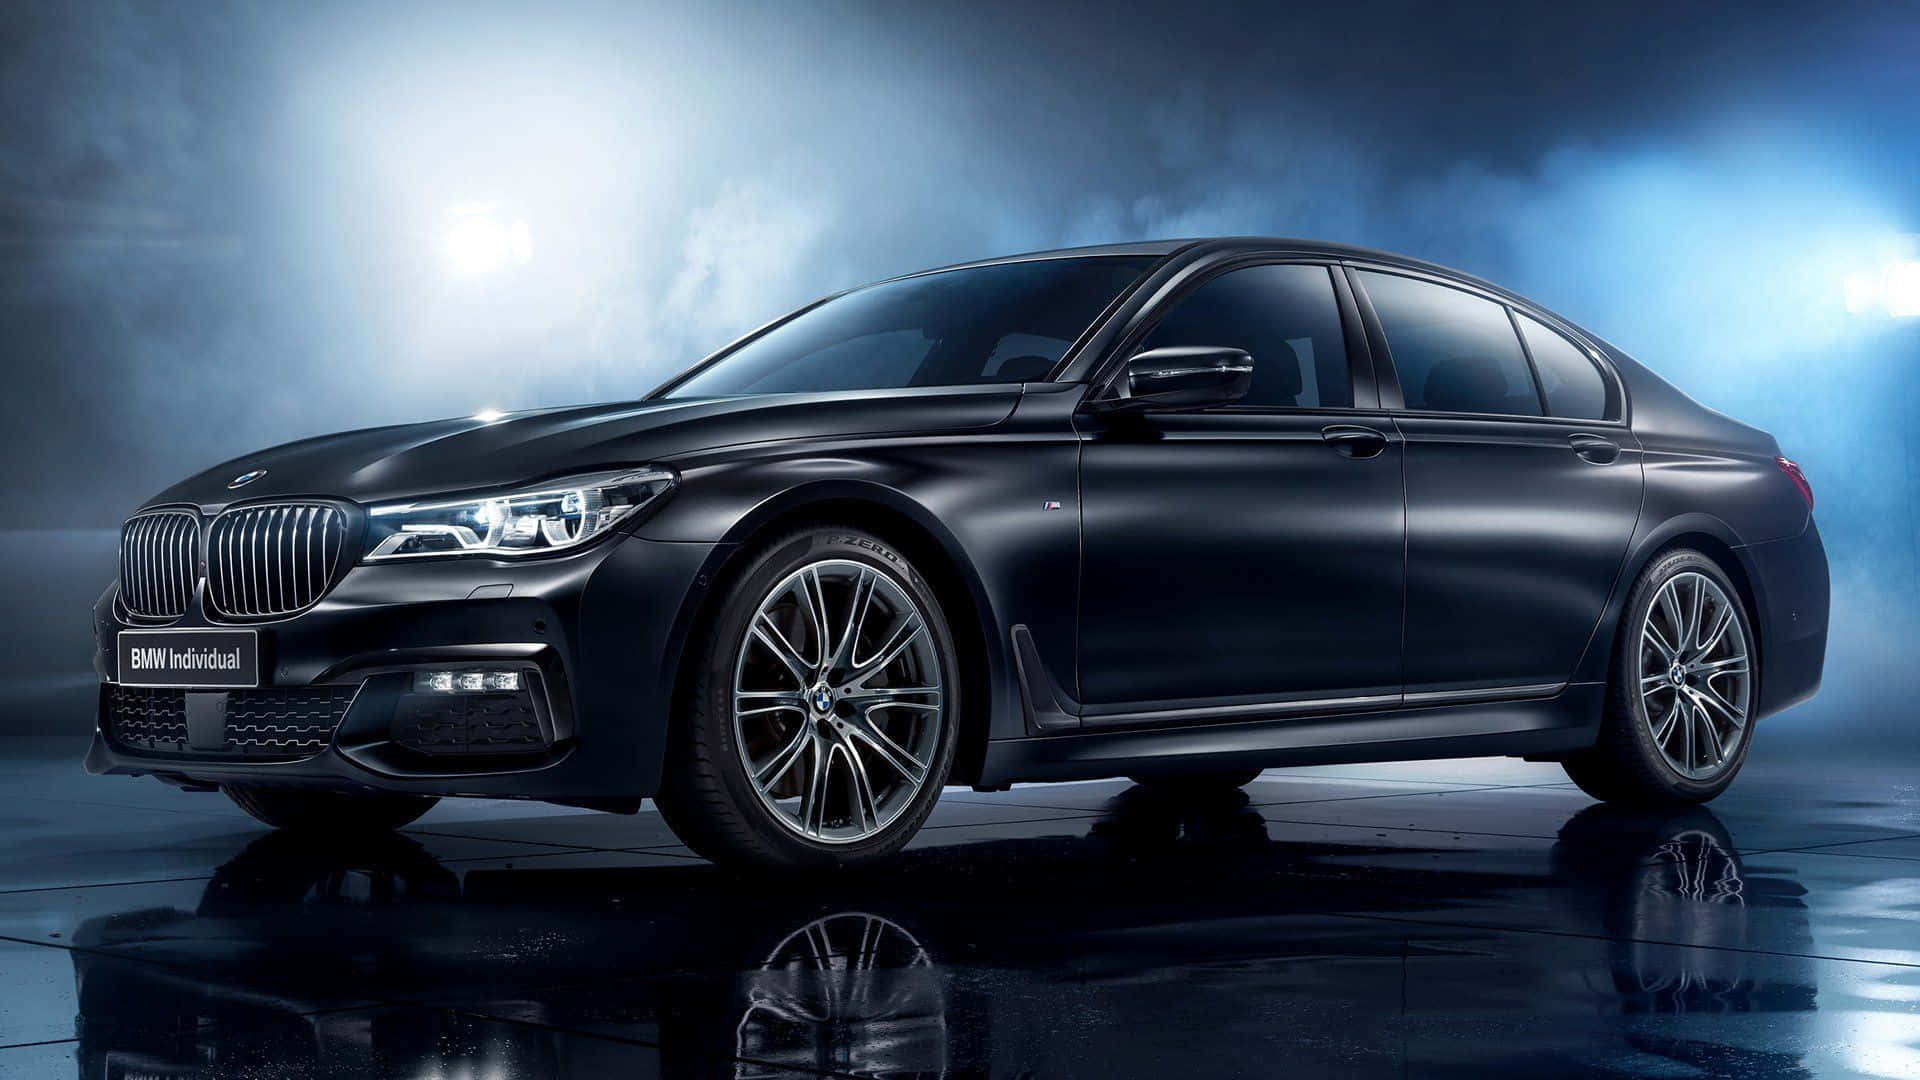 Sleek and Luxurious BMW 7 Series in Action Wallpaper